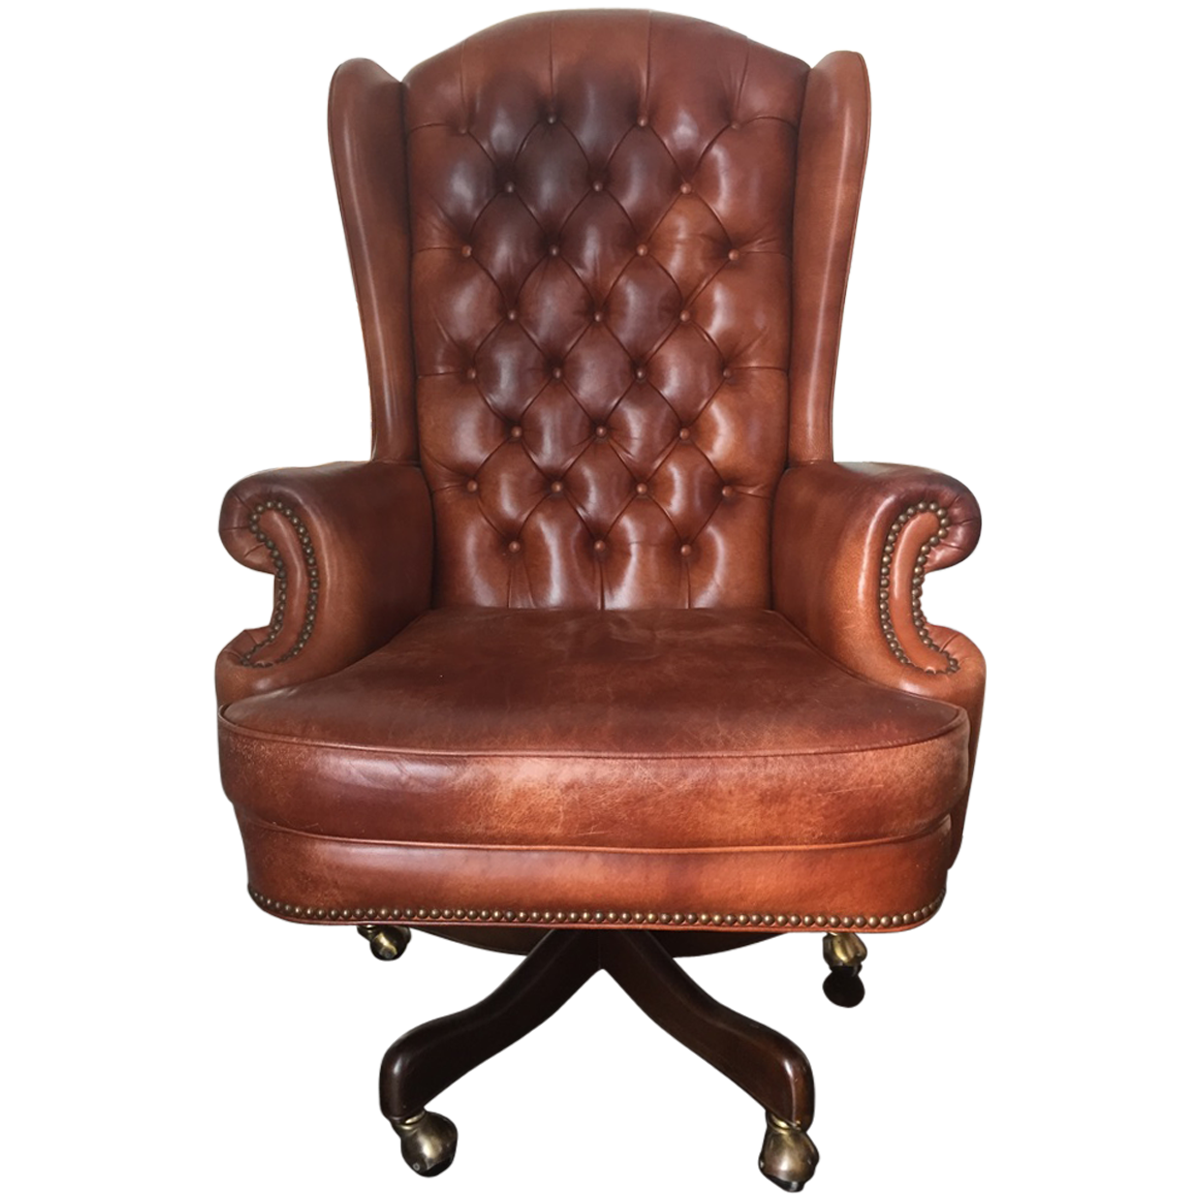 Wing Chair Transparent PNG